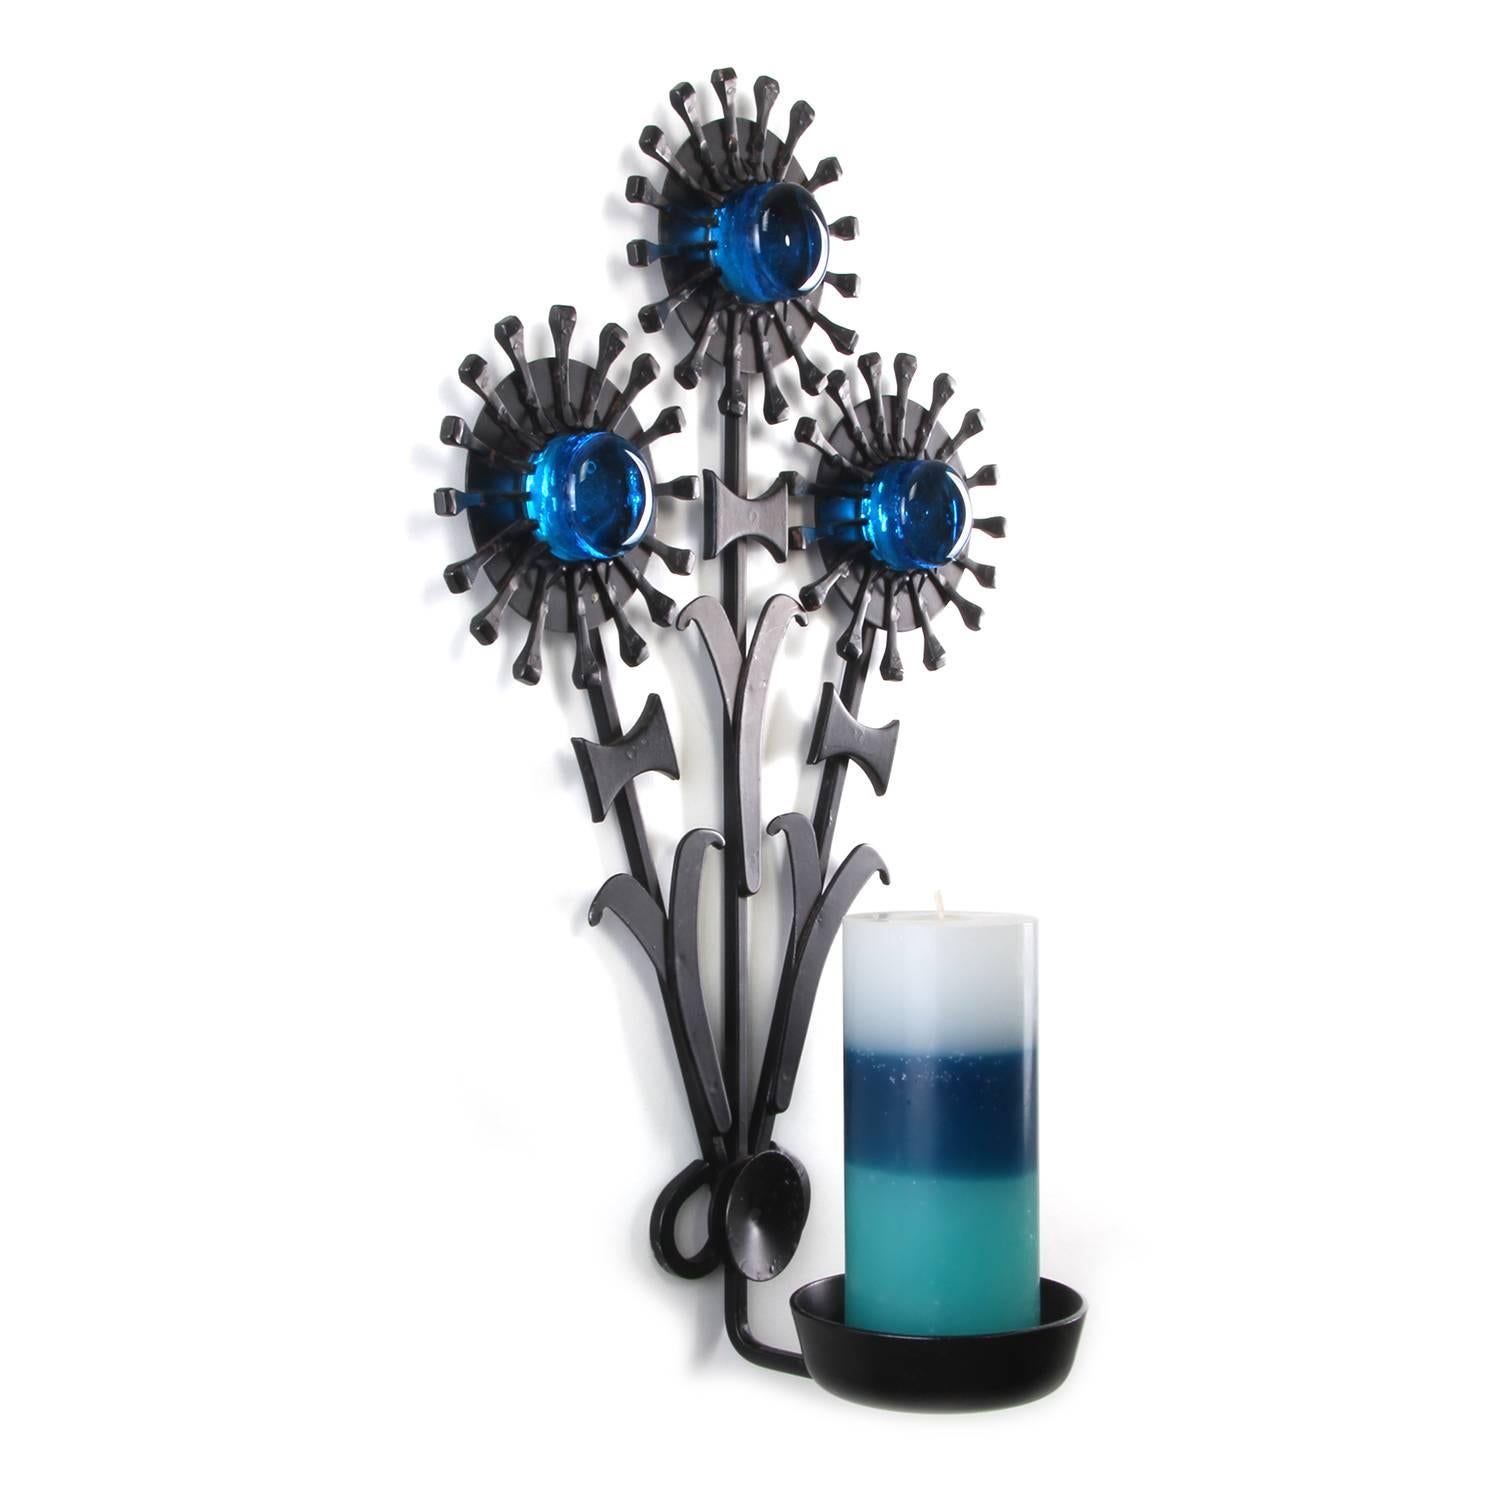 Danish Sconce, Wrought Iron by Dantoft, 1960s, Beautiful Candle Holder with Blue Glass For Sale